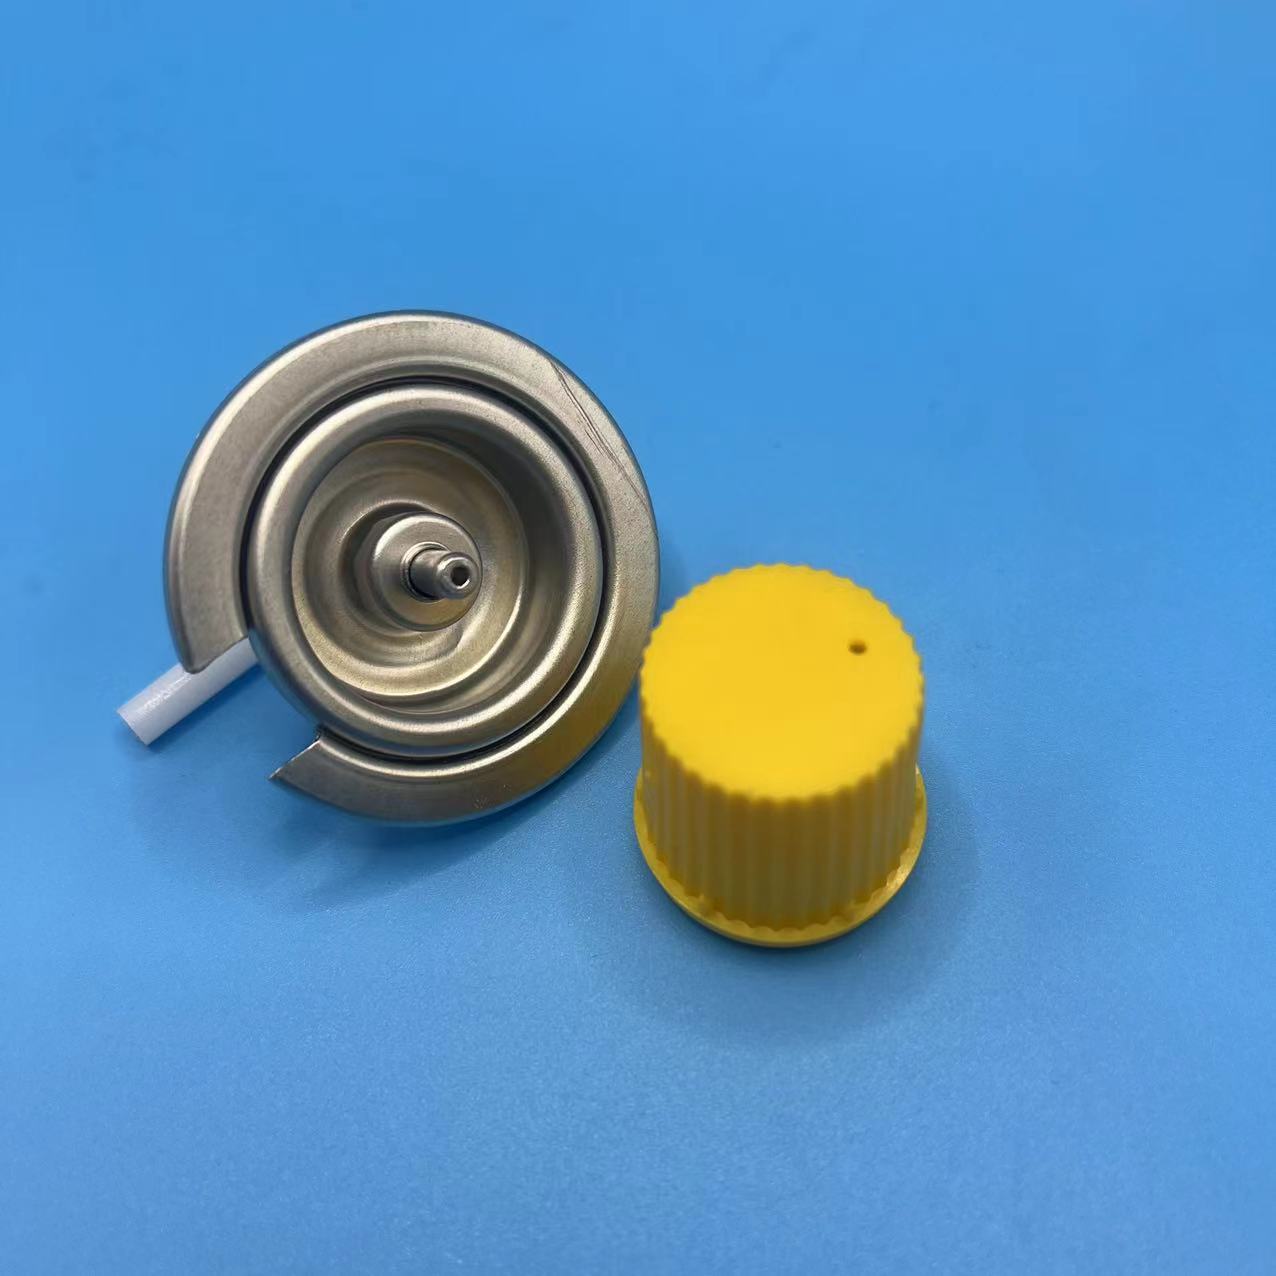 High Quality Butane Gas Stove Valve with Special Mounting Cup Perfect for Portable Stove Applications 